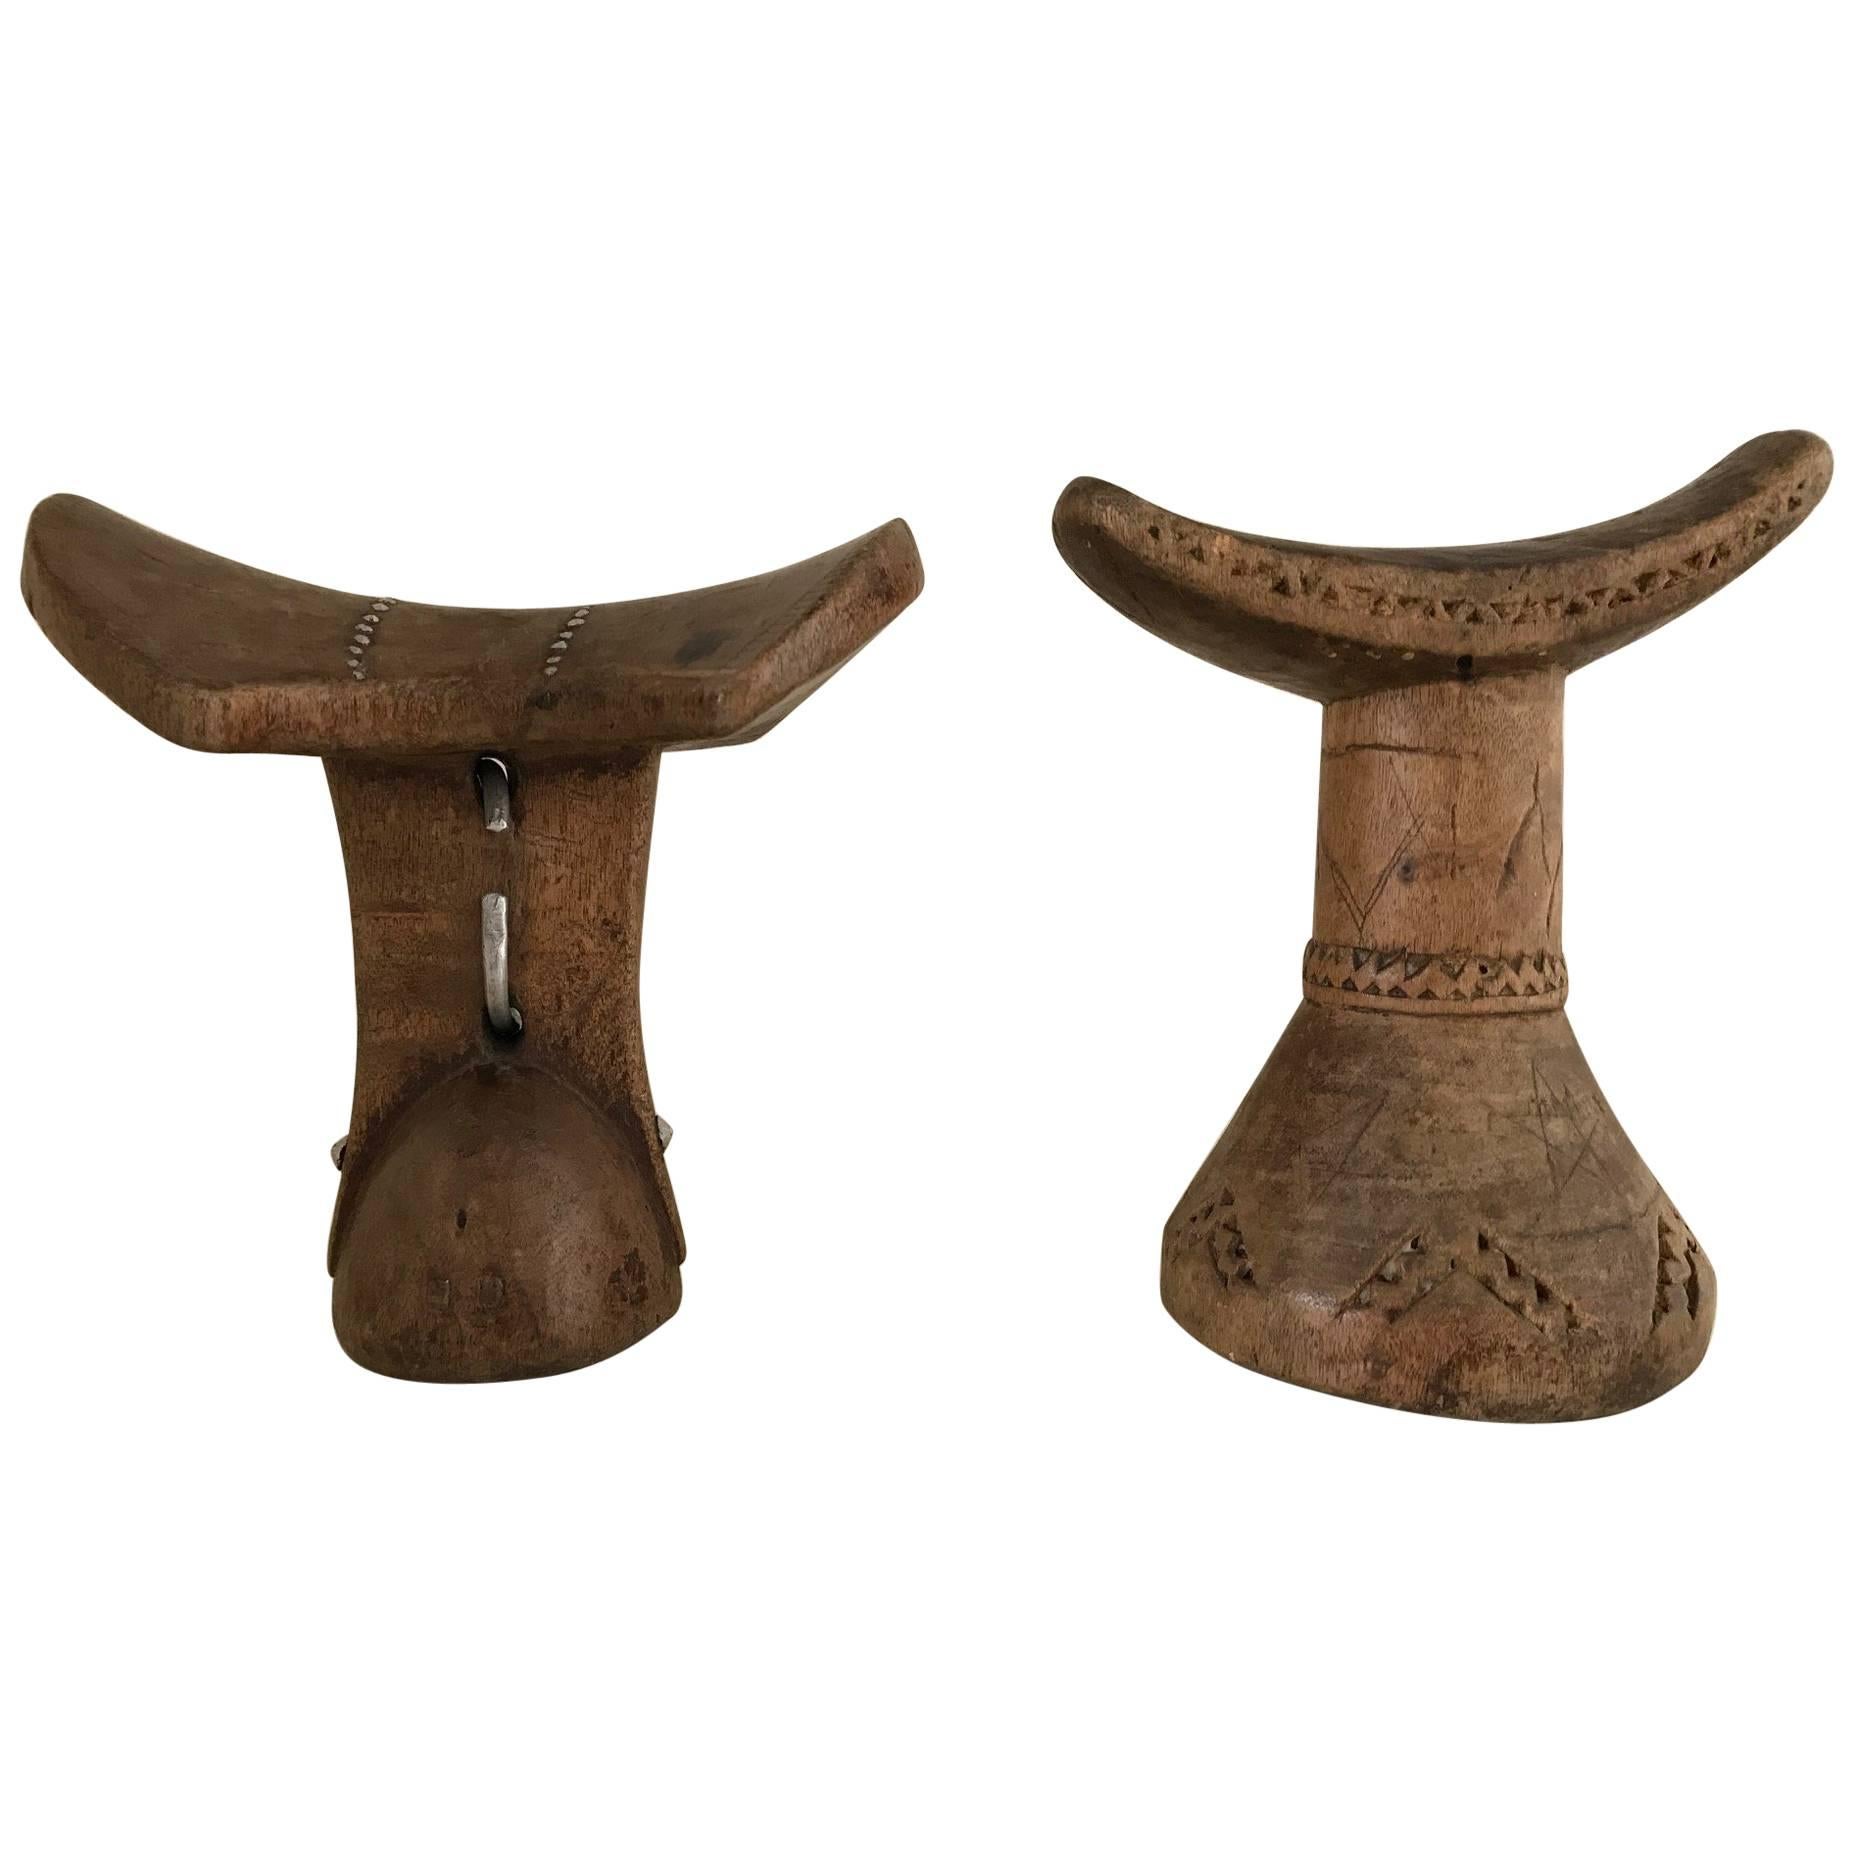 Two Turkana African Headrests, Ethiopian from the Dassanetch People